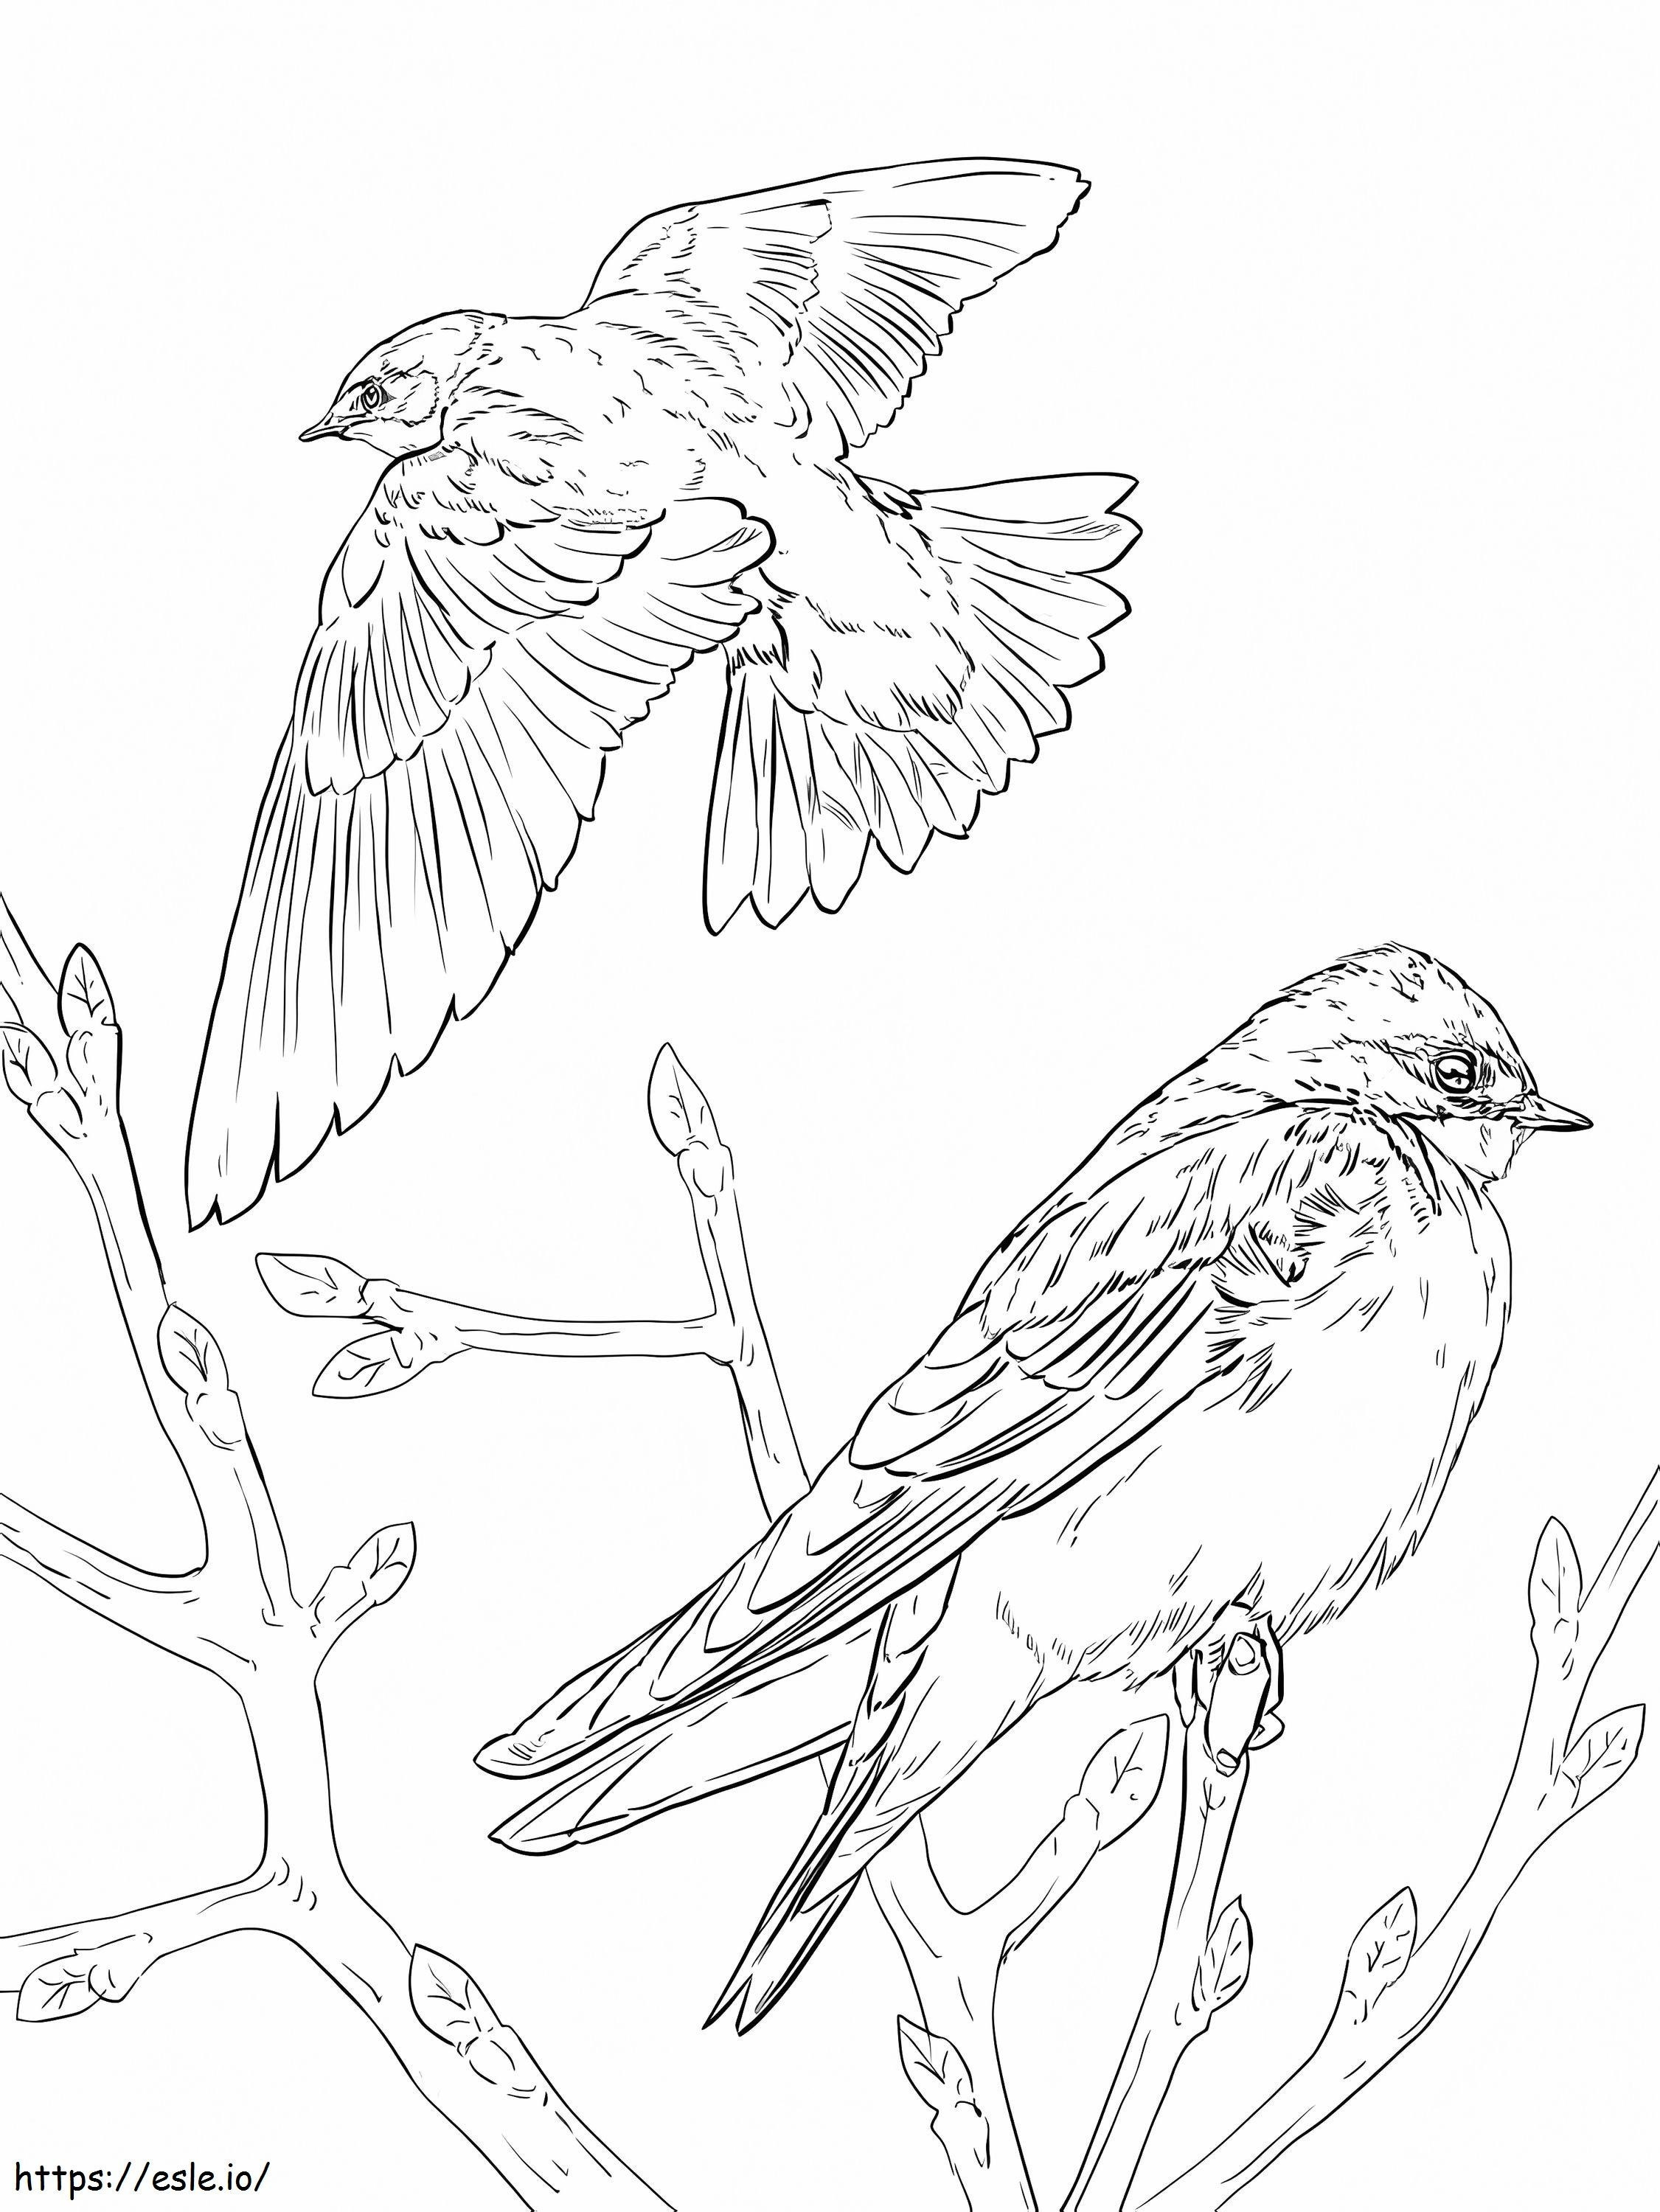 Tree Swallows coloring page